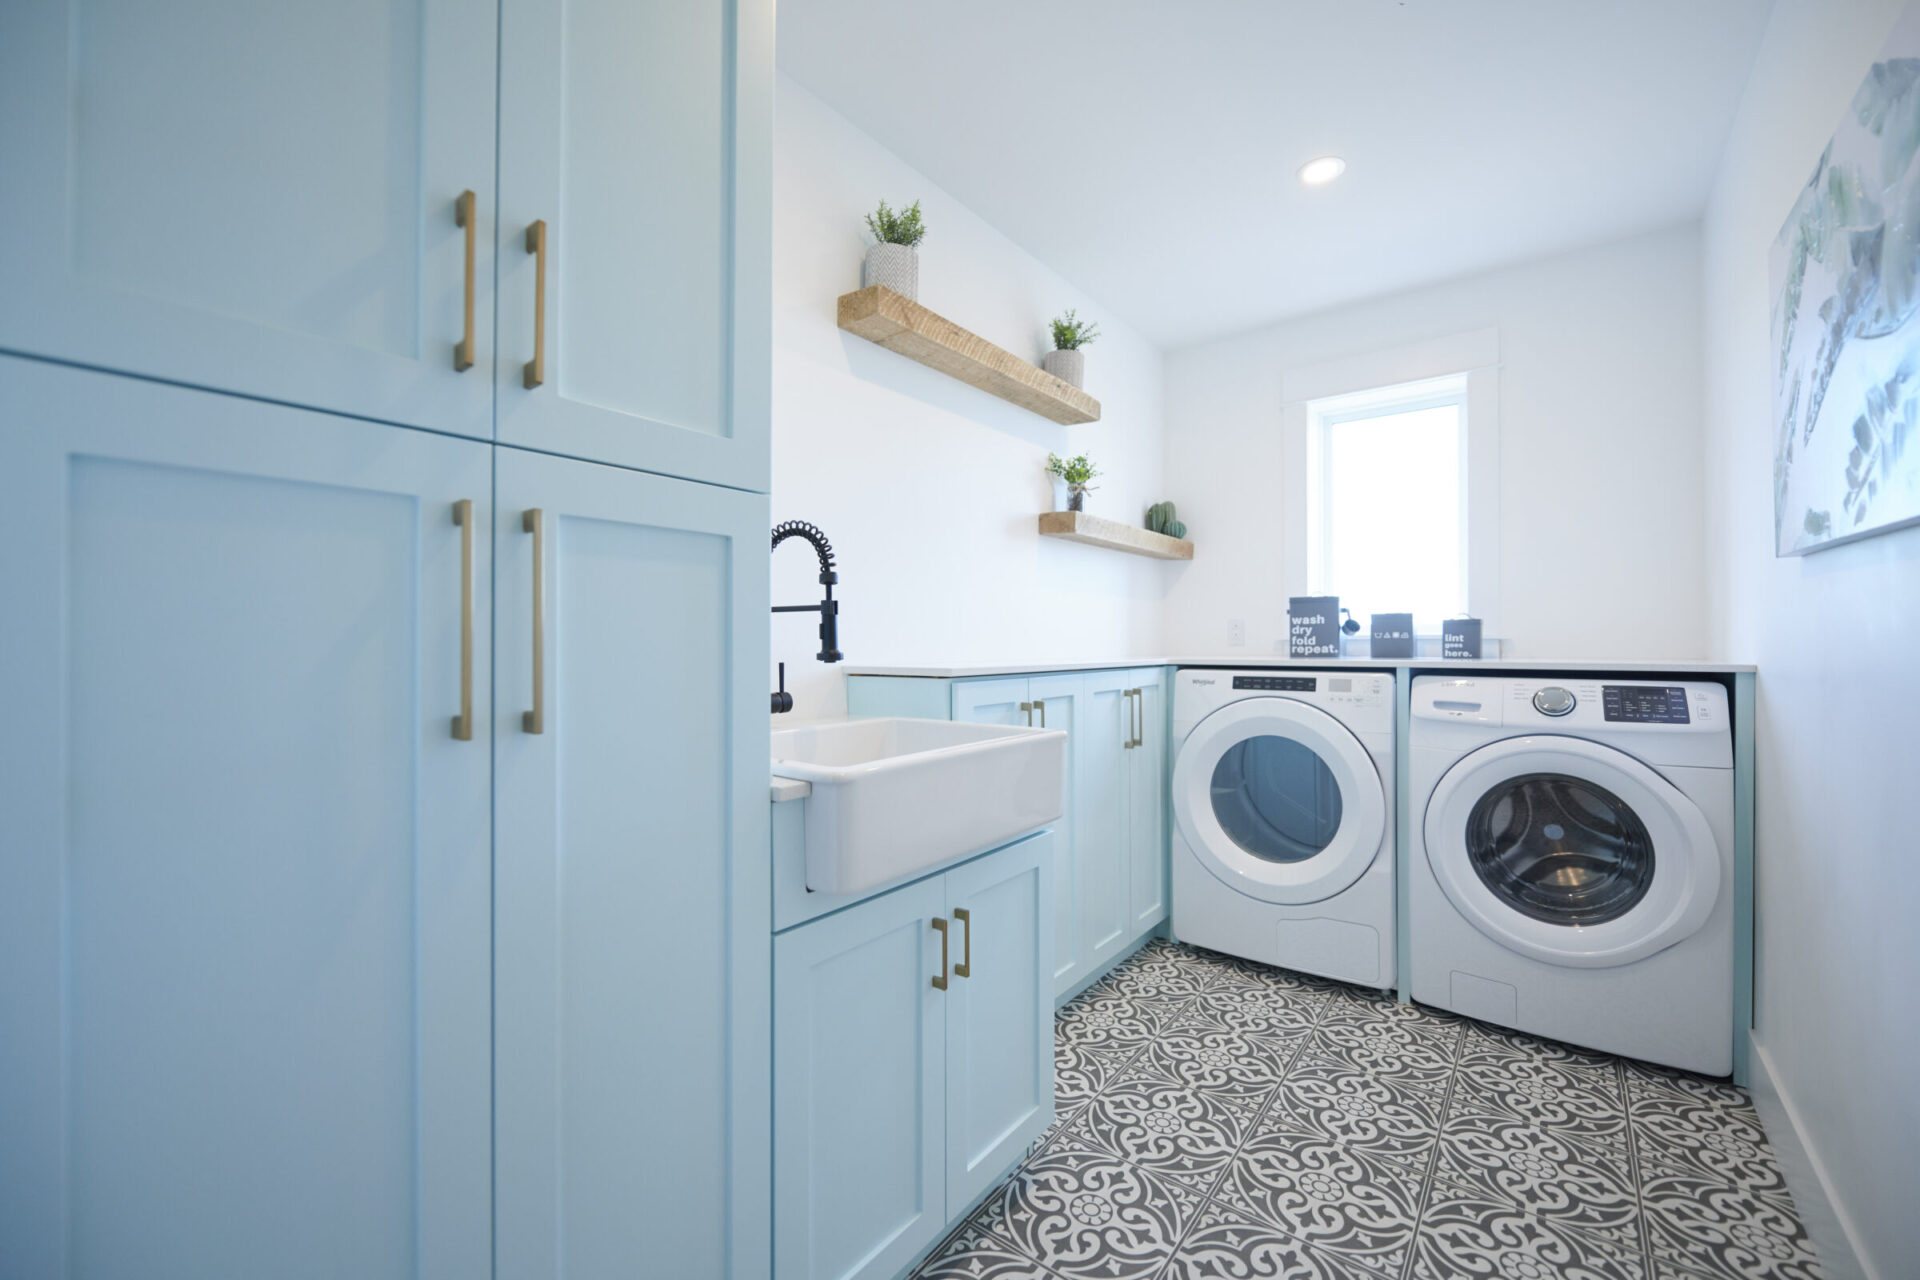 This image shows a bright laundry room with blue cabinets, a white utility sink, front-loading washer and dryer, and decorative shelving with plants.